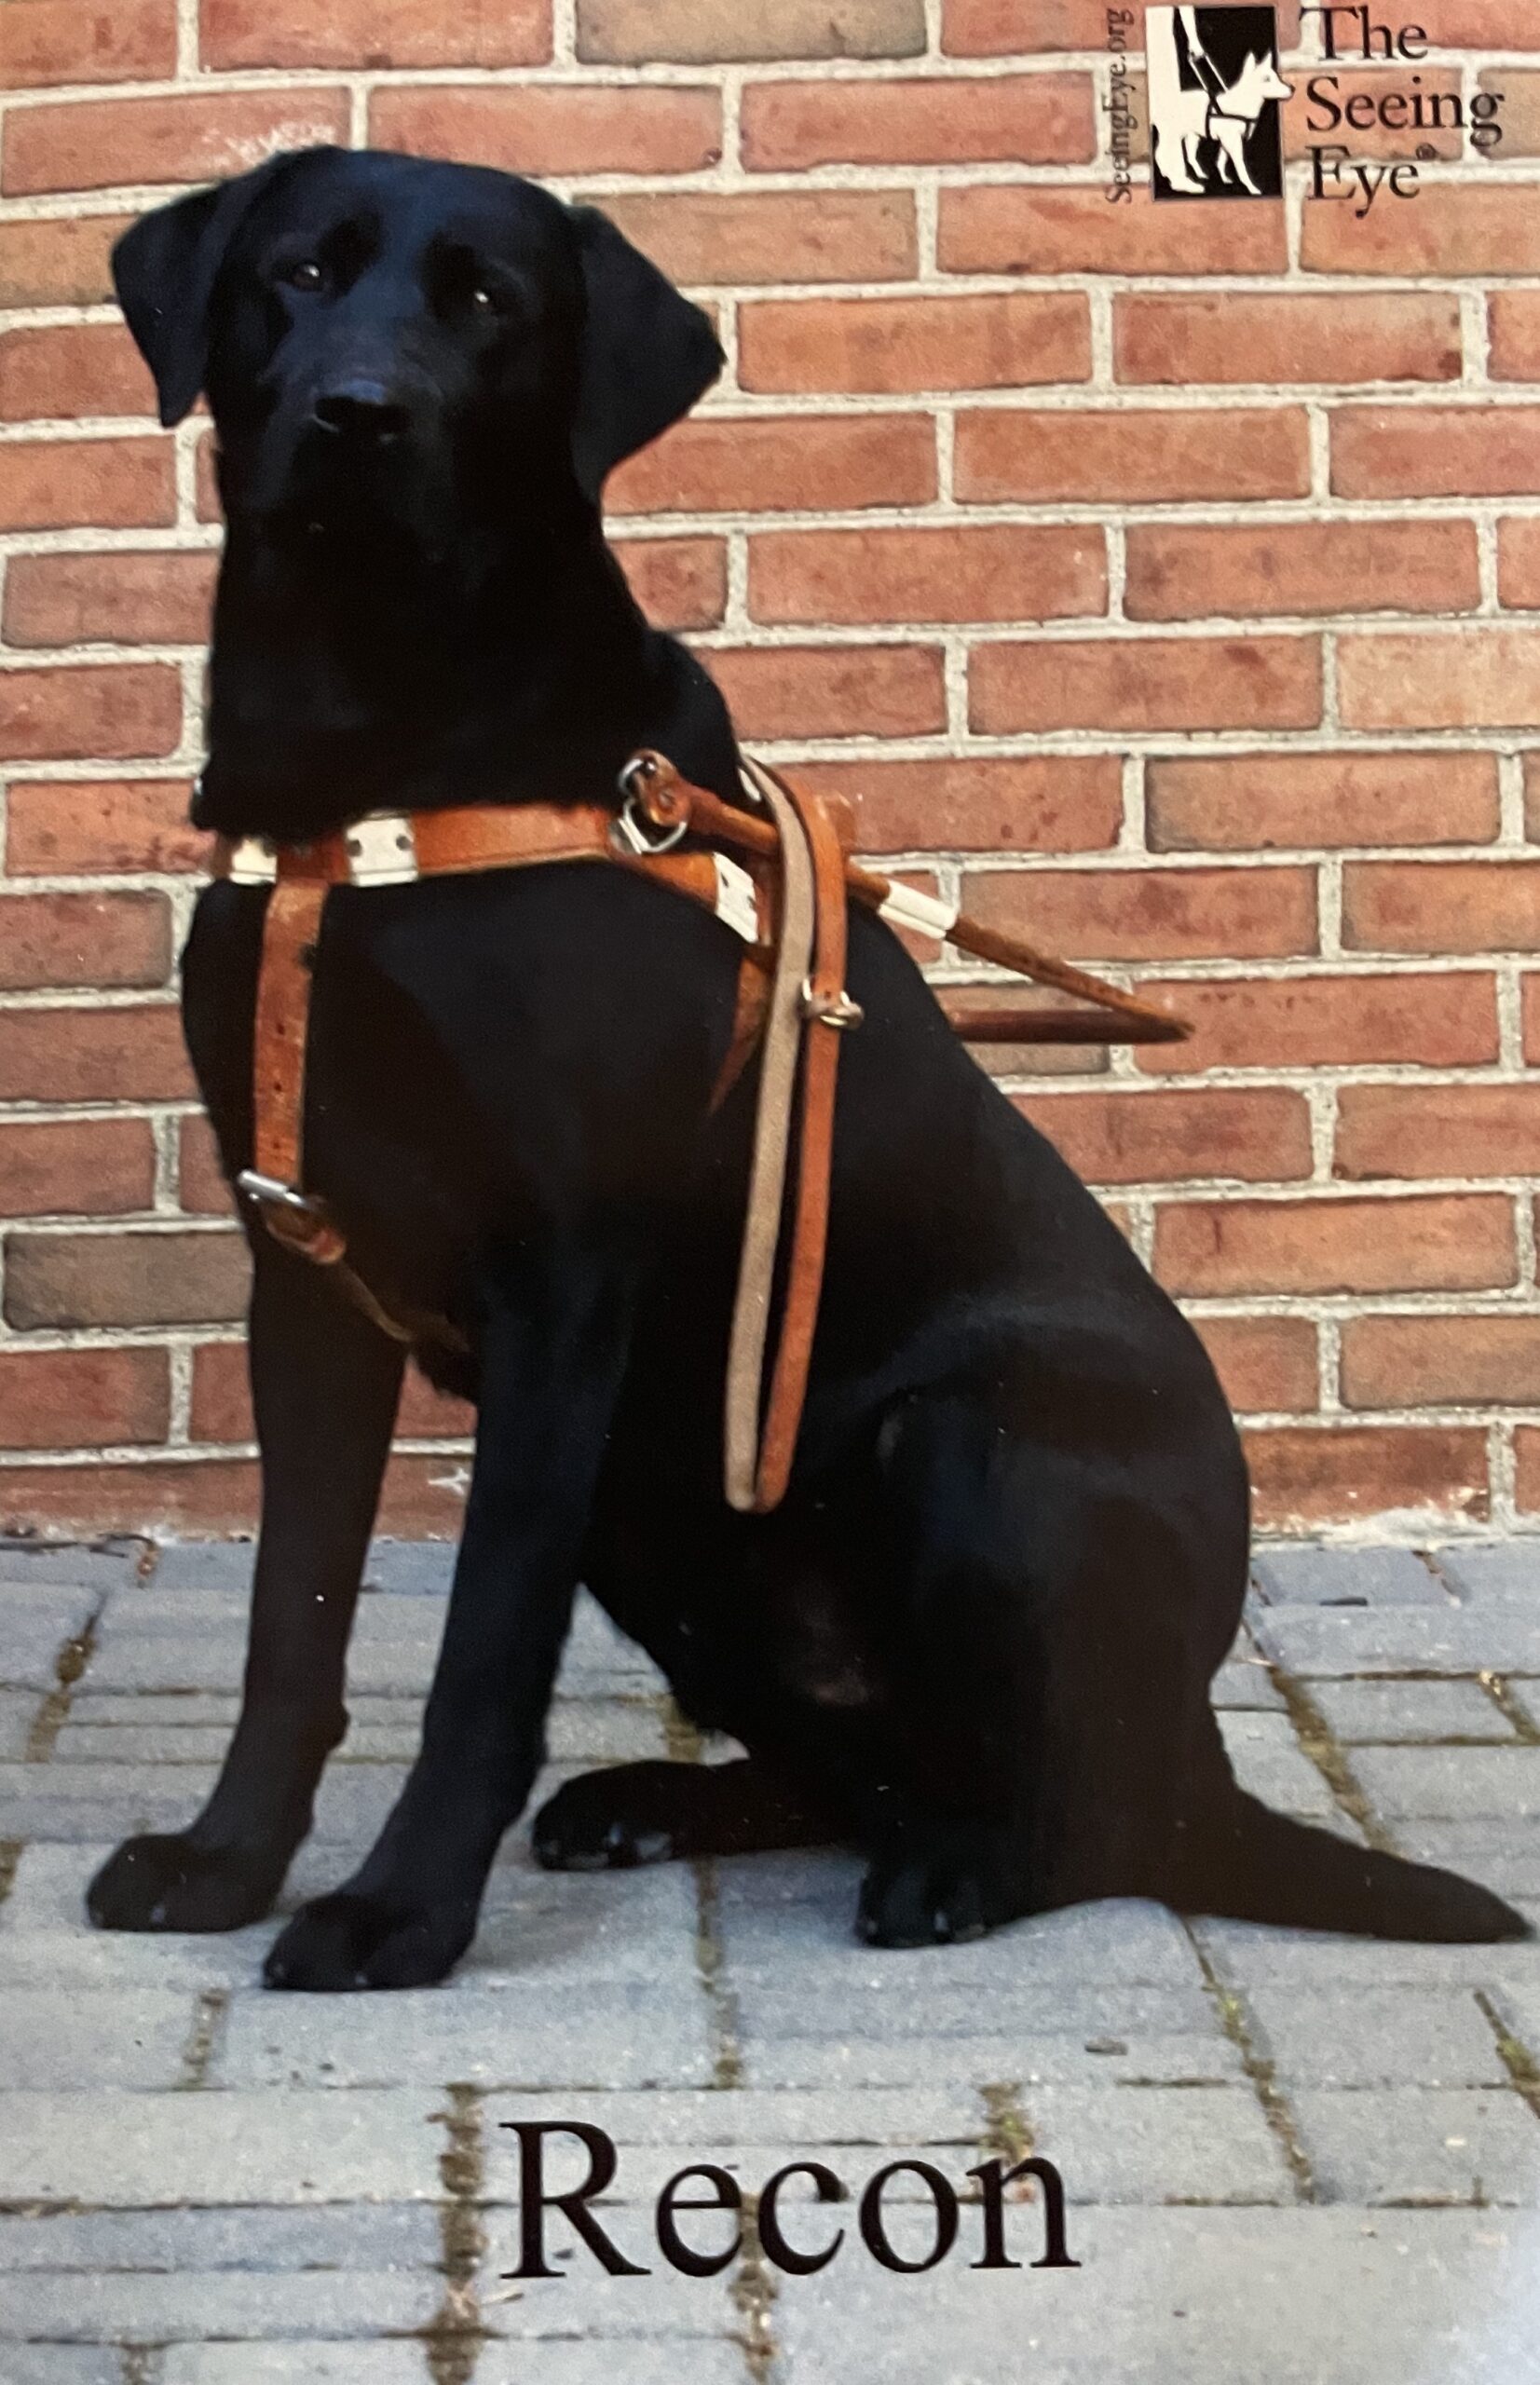 A black Labrador retriever sits in front of a brick wall wearing a guide dog harness.